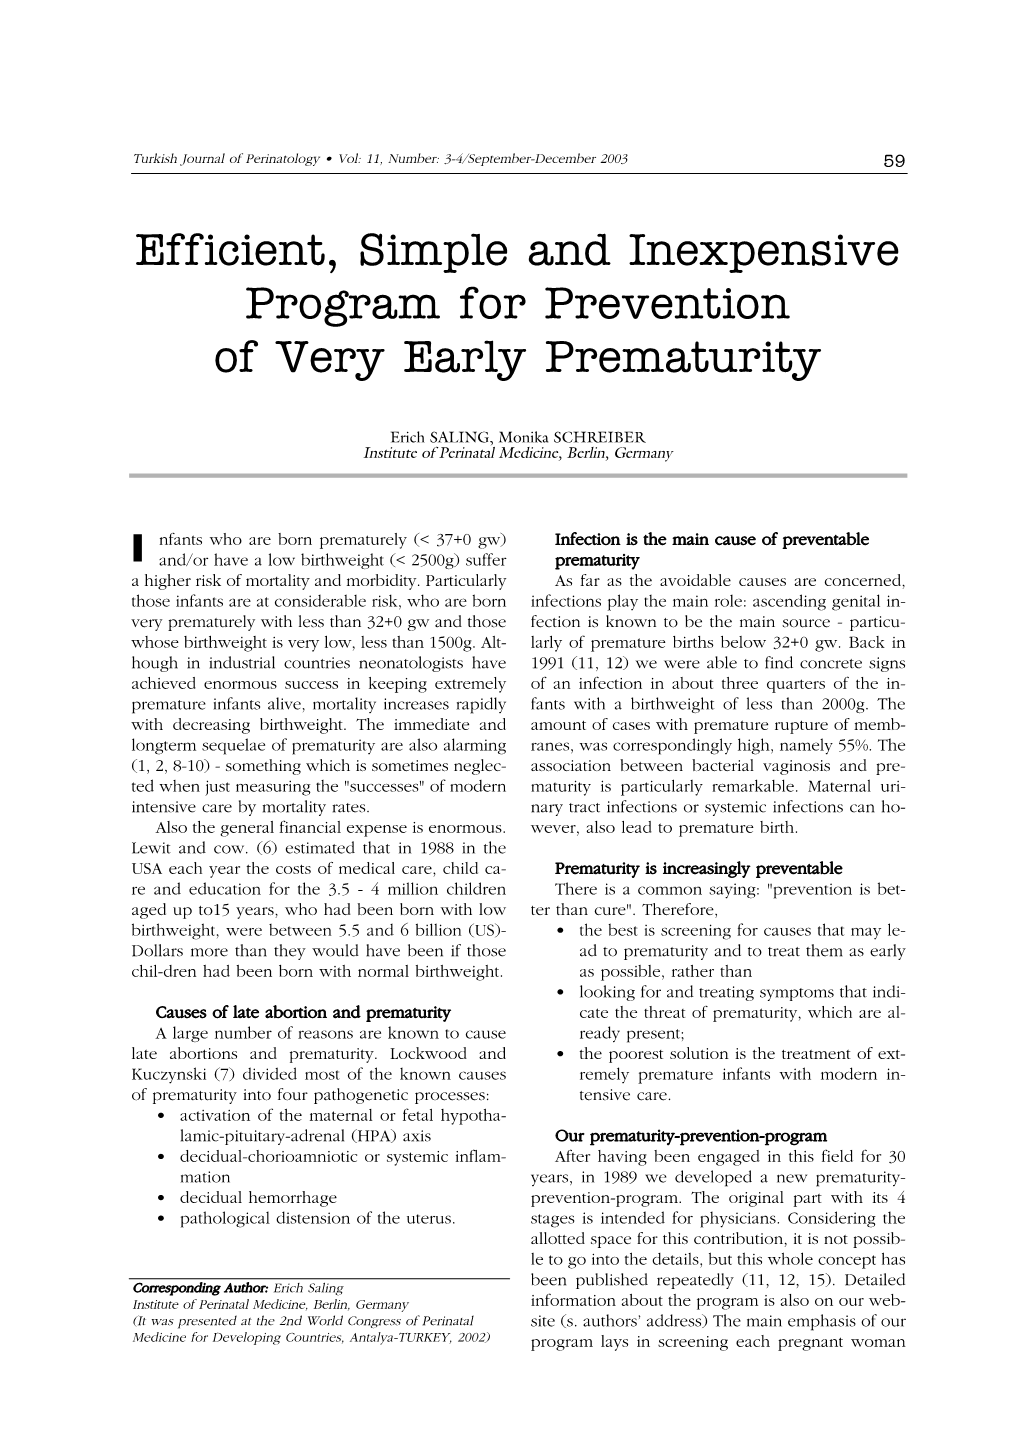 Efficient, Simple and Inexpensive Program for Prevention of Very Early Prematurity